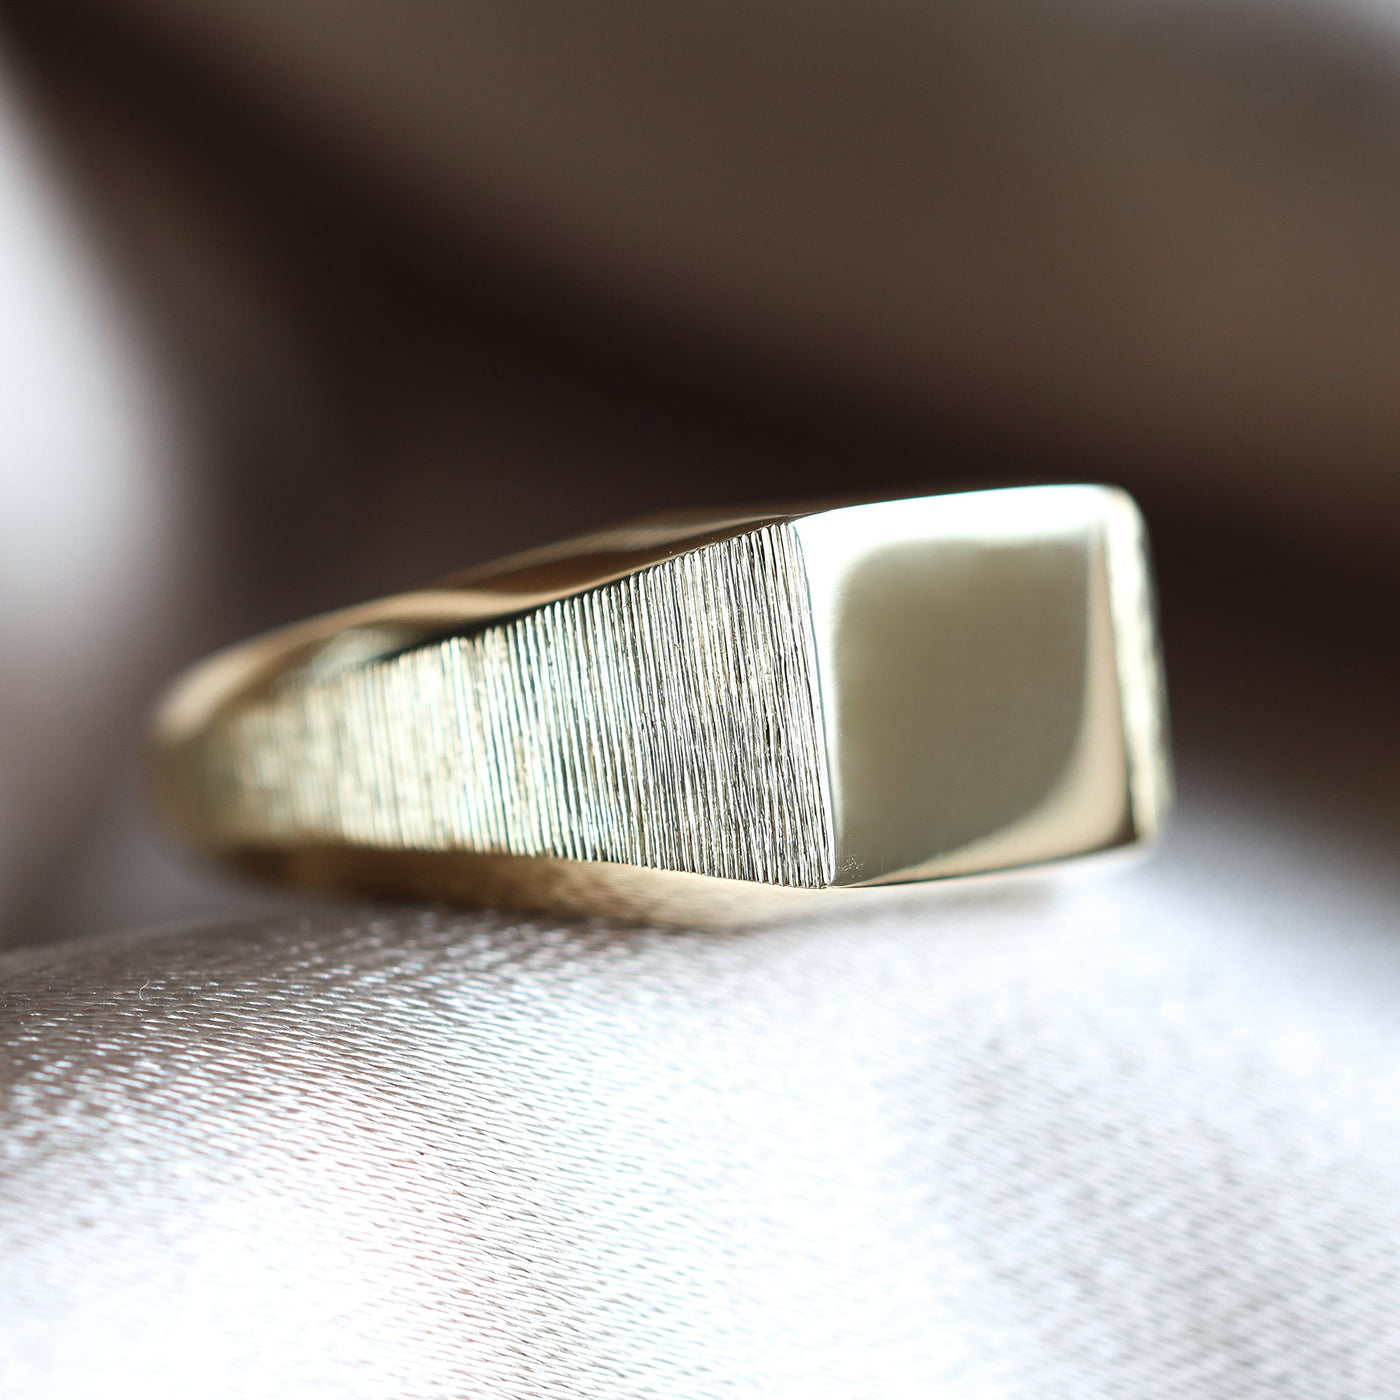 Gold signet ring on fabric surface, close-up of metal object, customizable with gemstones.